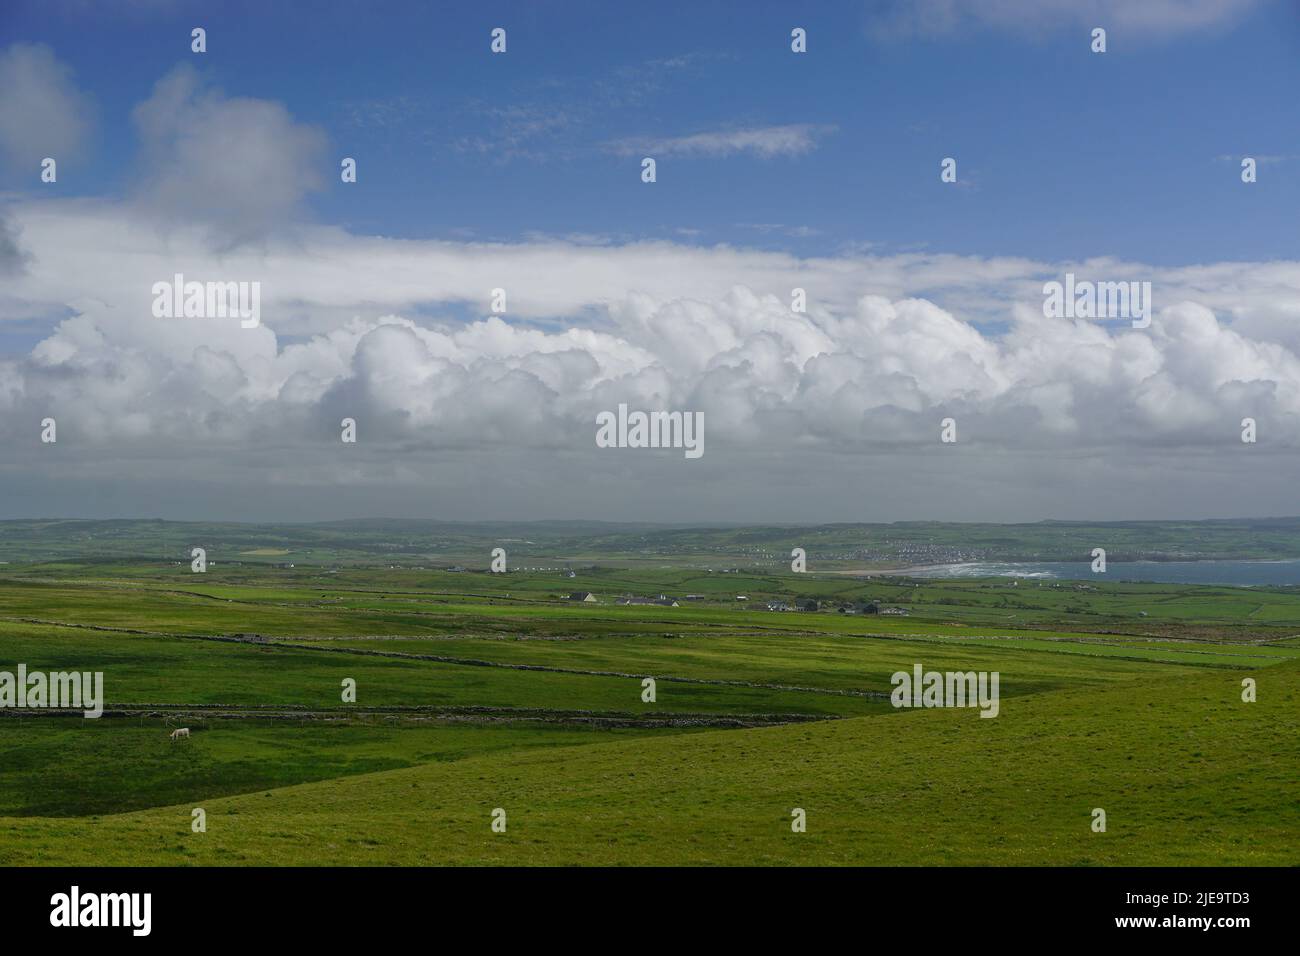 Lahinch, Co. Clare, Ireland: Green fields and farms in County Clare, Ireland, with a view of Lahinch and Liscannor Bay in the distance. Stock Photo